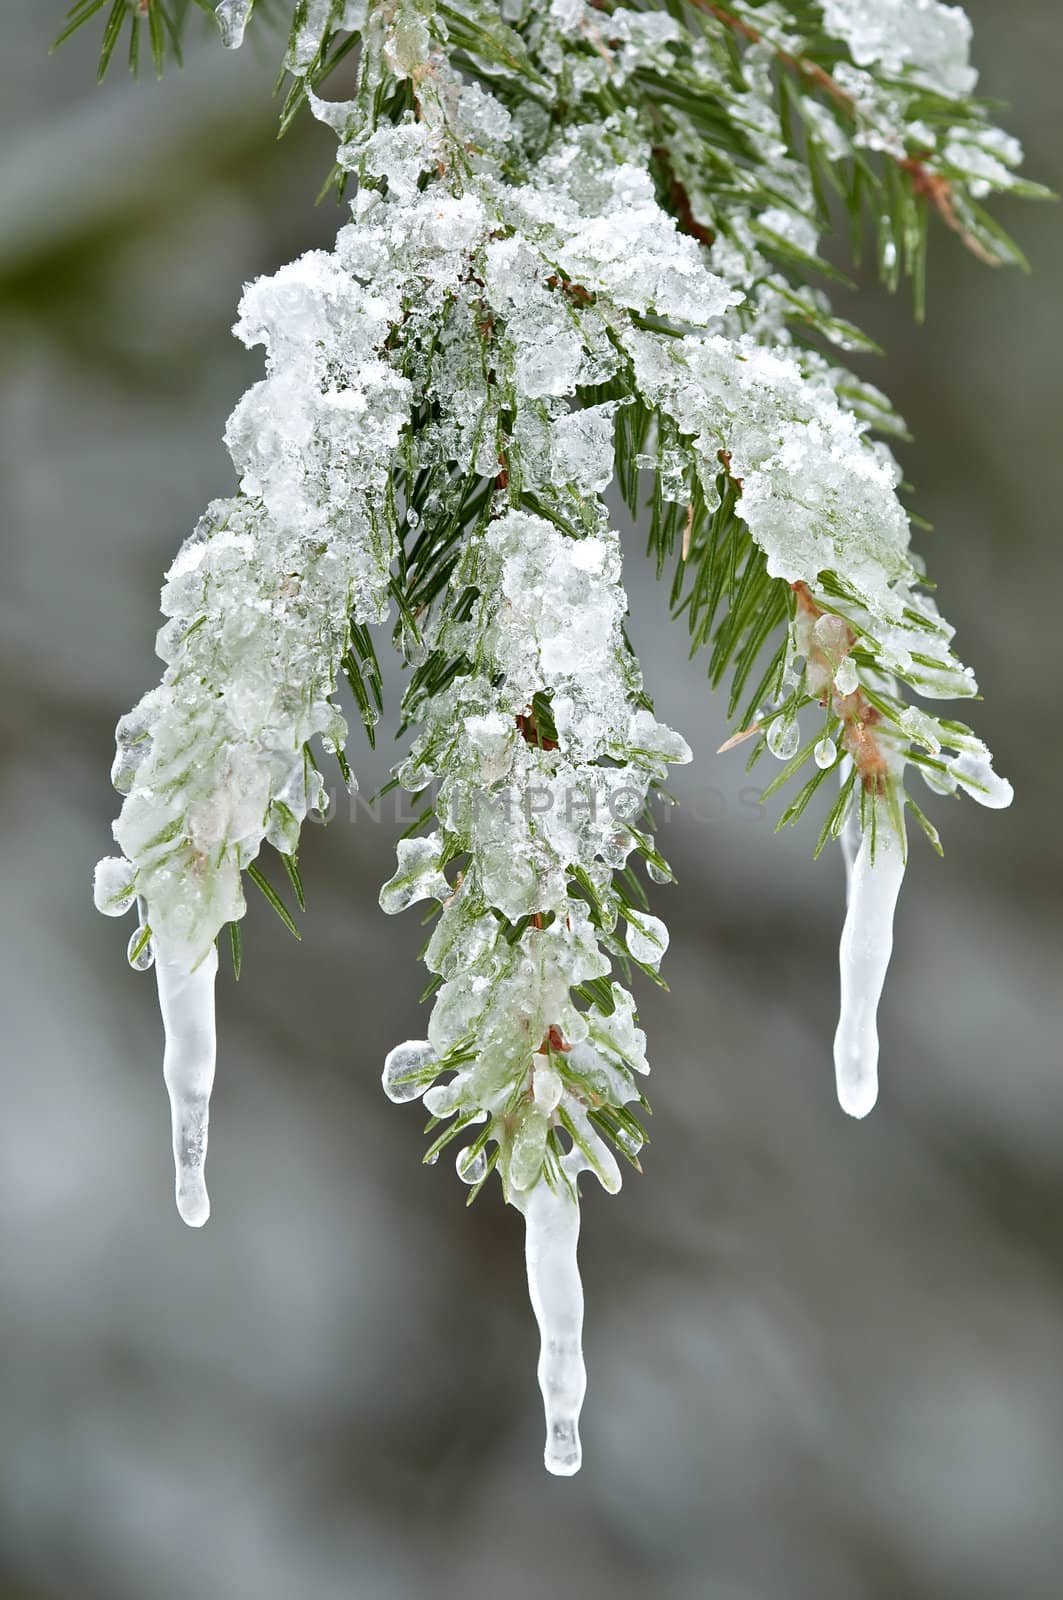 Icecles on twigs of the red spruce tree in europe